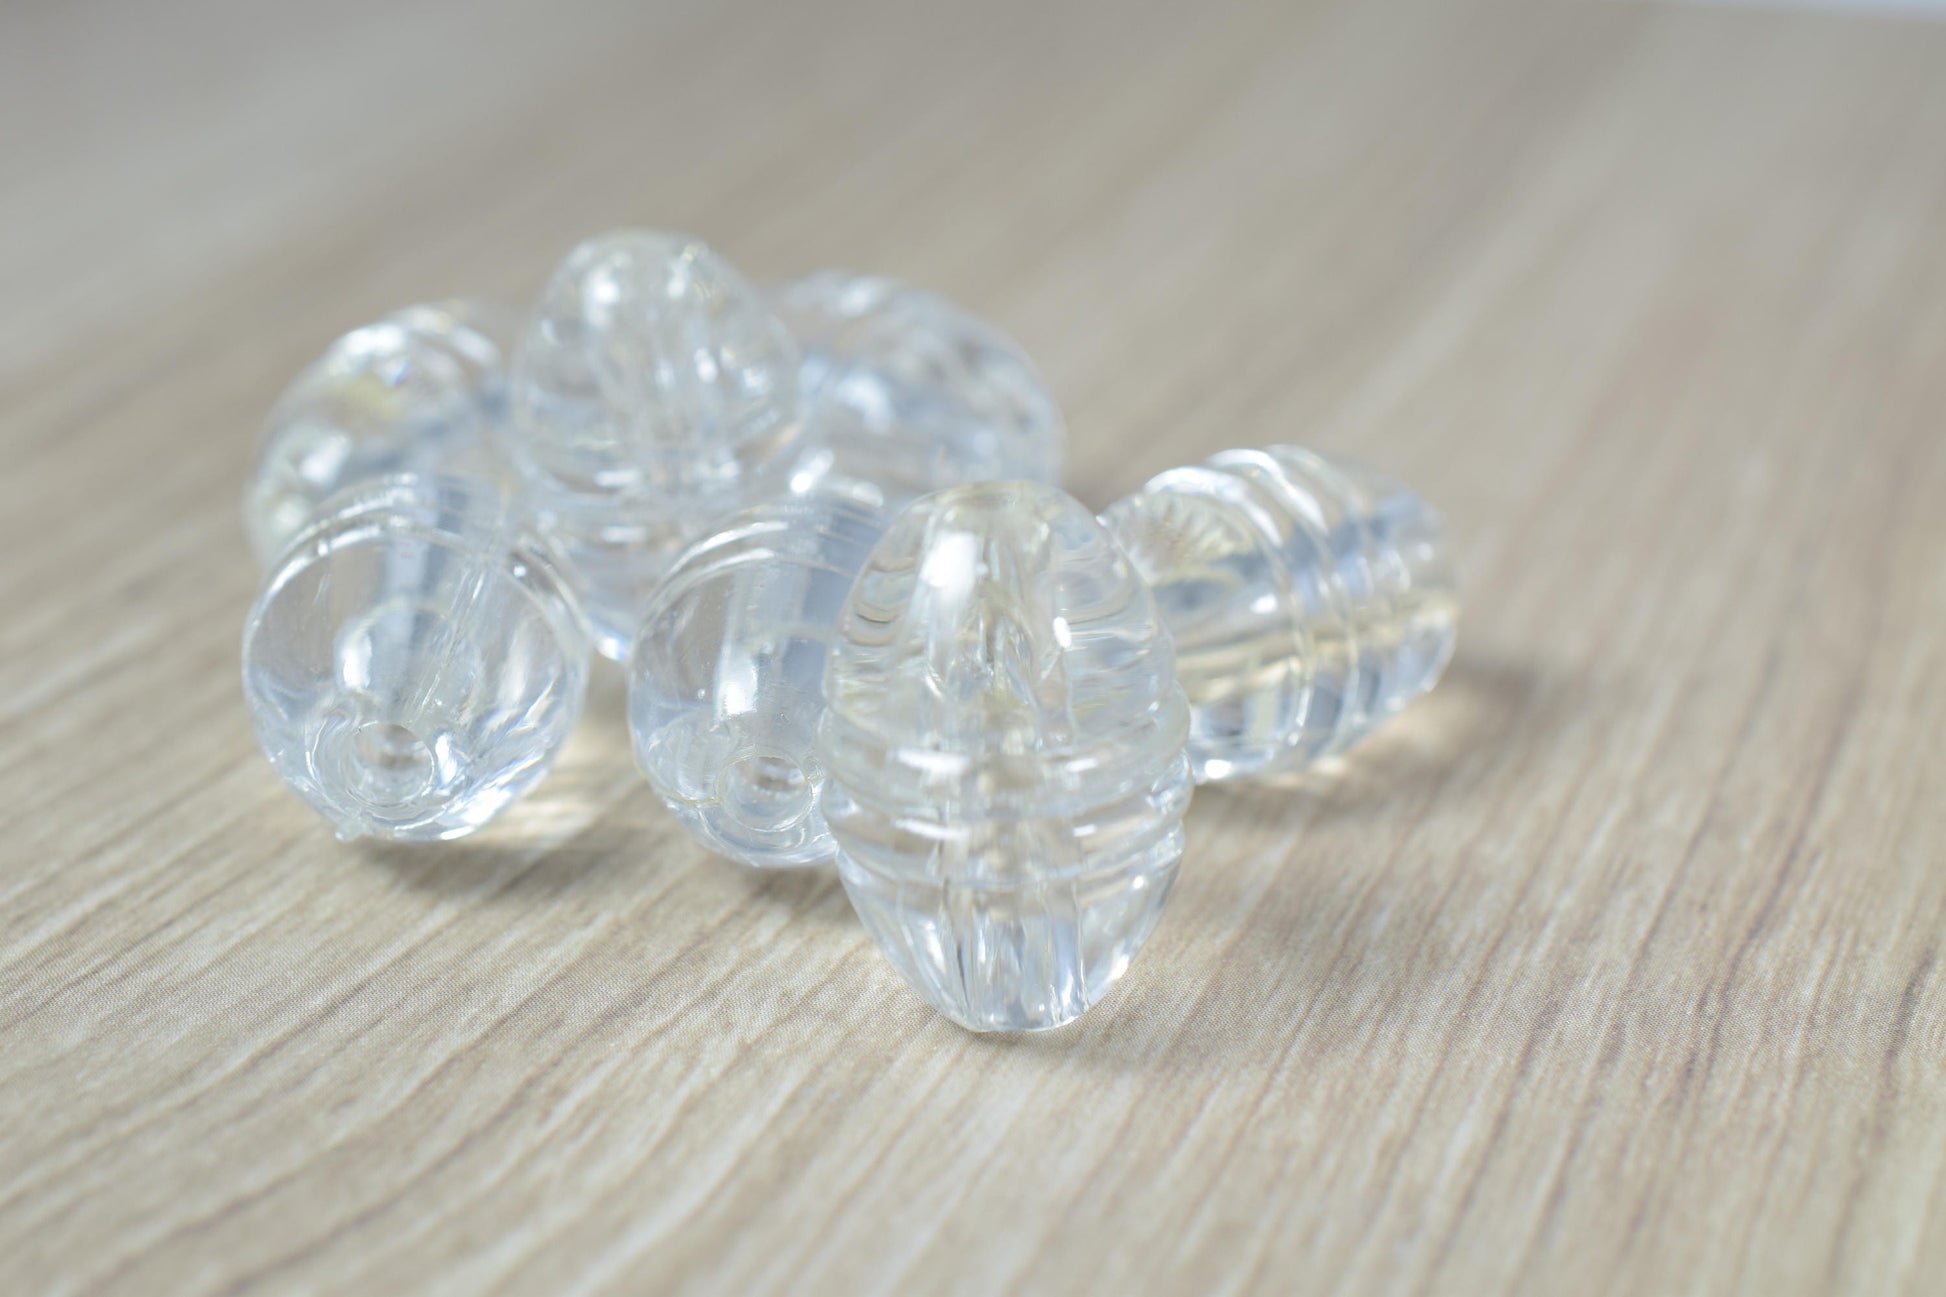 18 x 25mm Clear Ridge Lucite Plastic Beads/Vintage Barrel Plastic Clear Beads/Wholesale/Sold by 60 PCs, Clear Beads,Grooved Tube Beads,